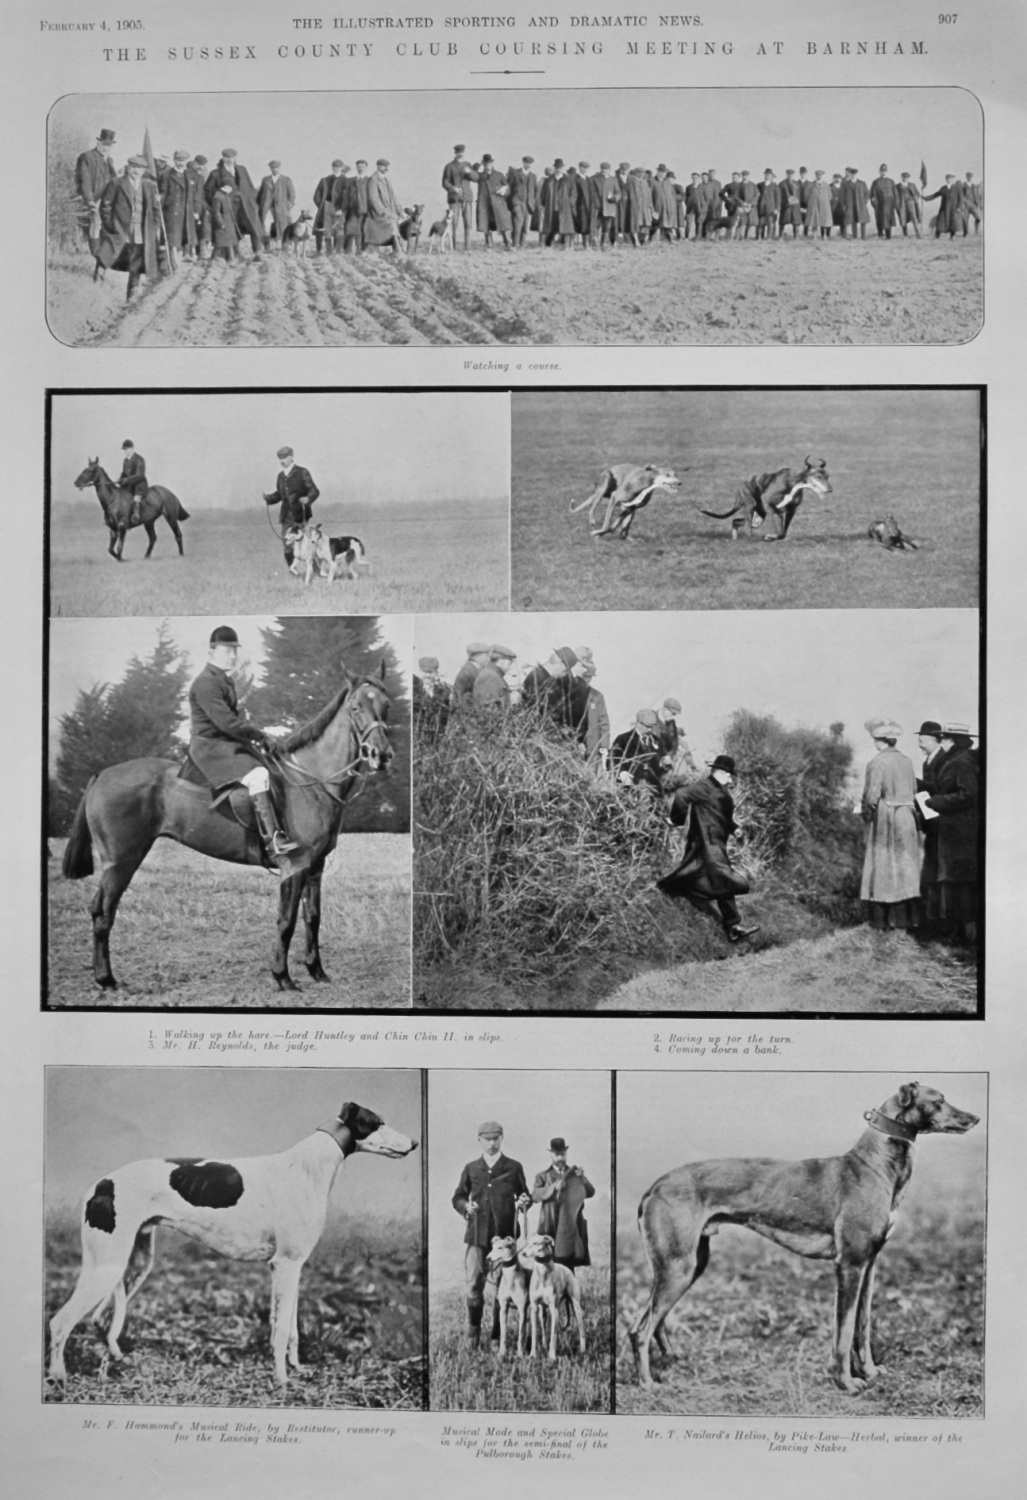 The Sussex County Club Coursing Meeting at Burnham.  1905.